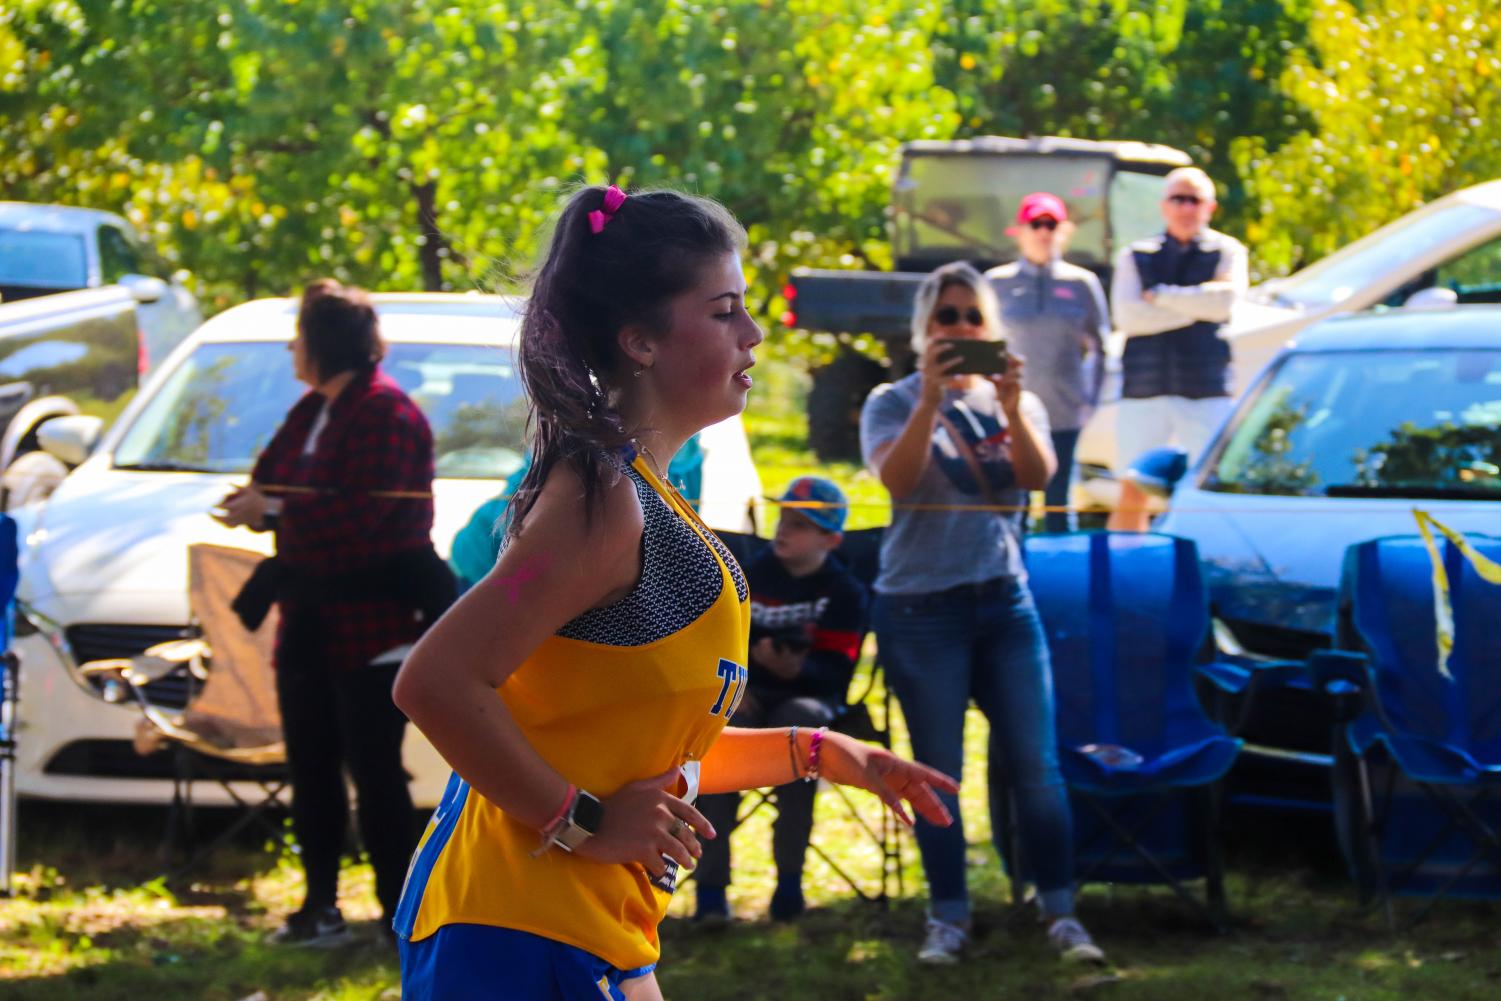 Tupelo+XC+ends+season+4th+at+State.